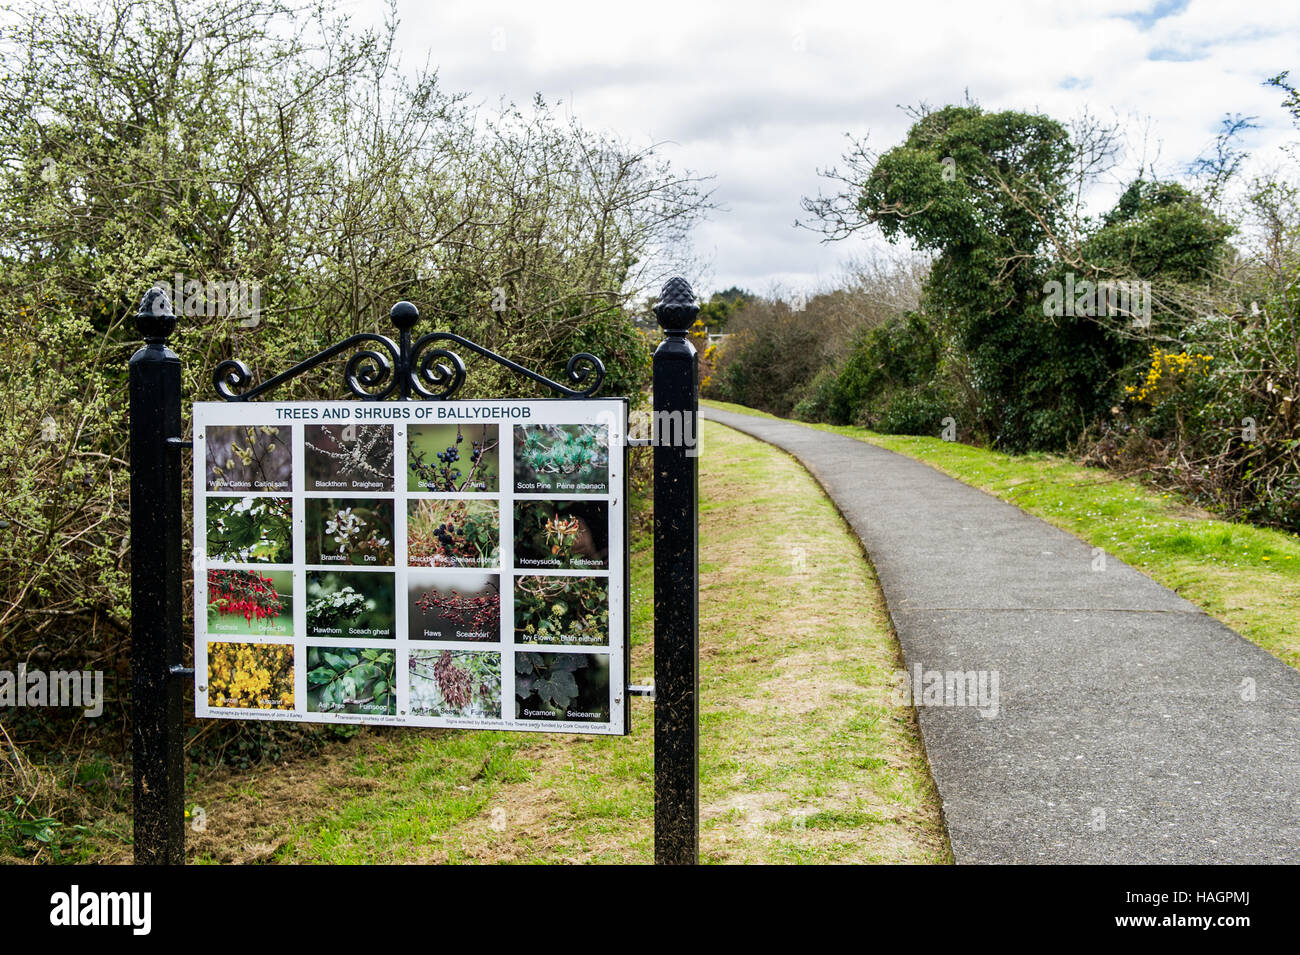 An information sign on a nature walk showing various trees and shrubs located in Ballydehob, West Cork, Ireland. Stock Photo